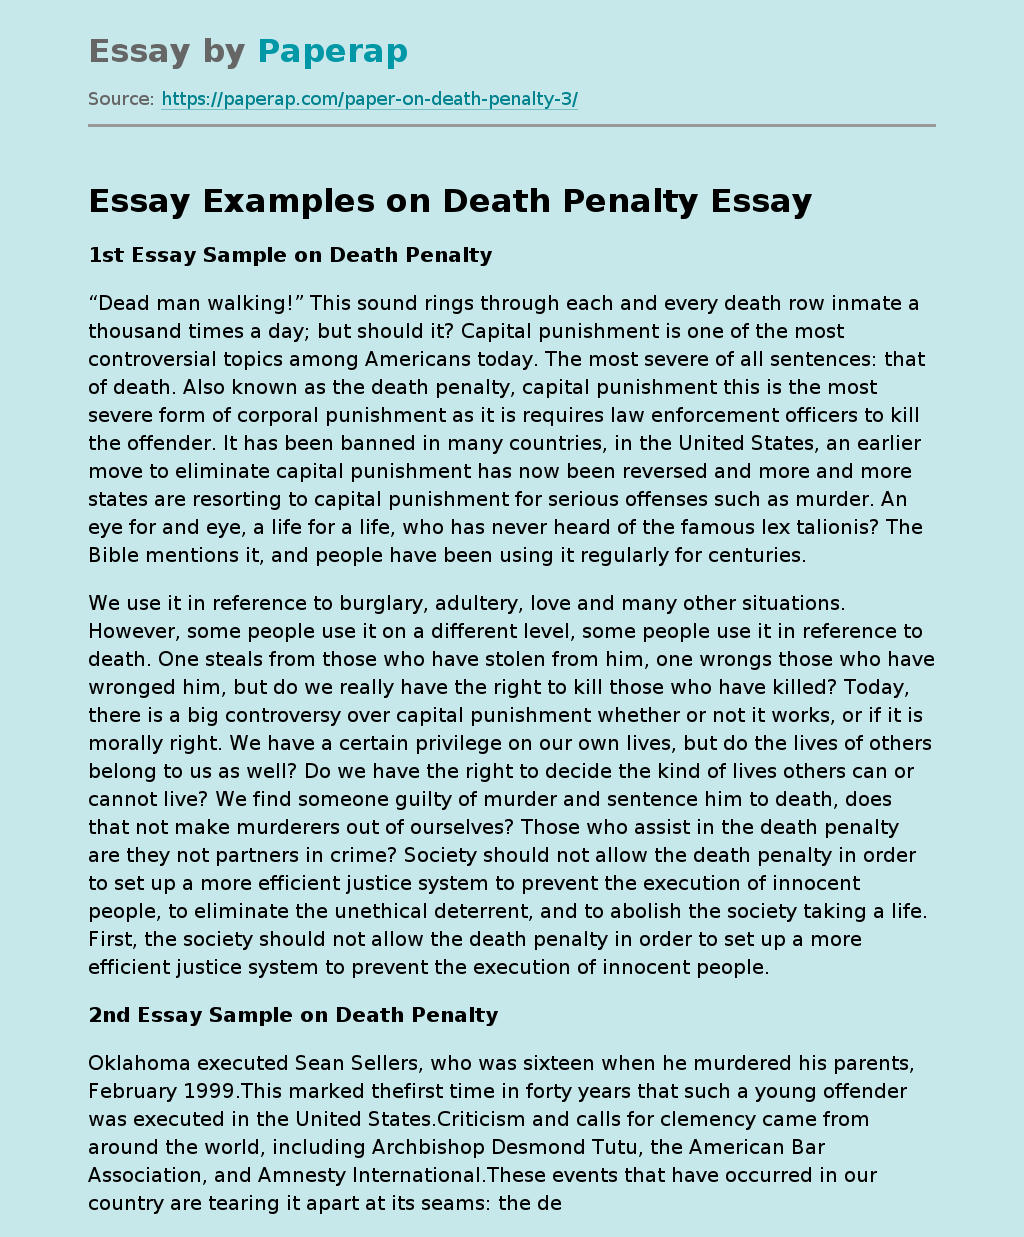 Society Should Not Allow the Death Penalty